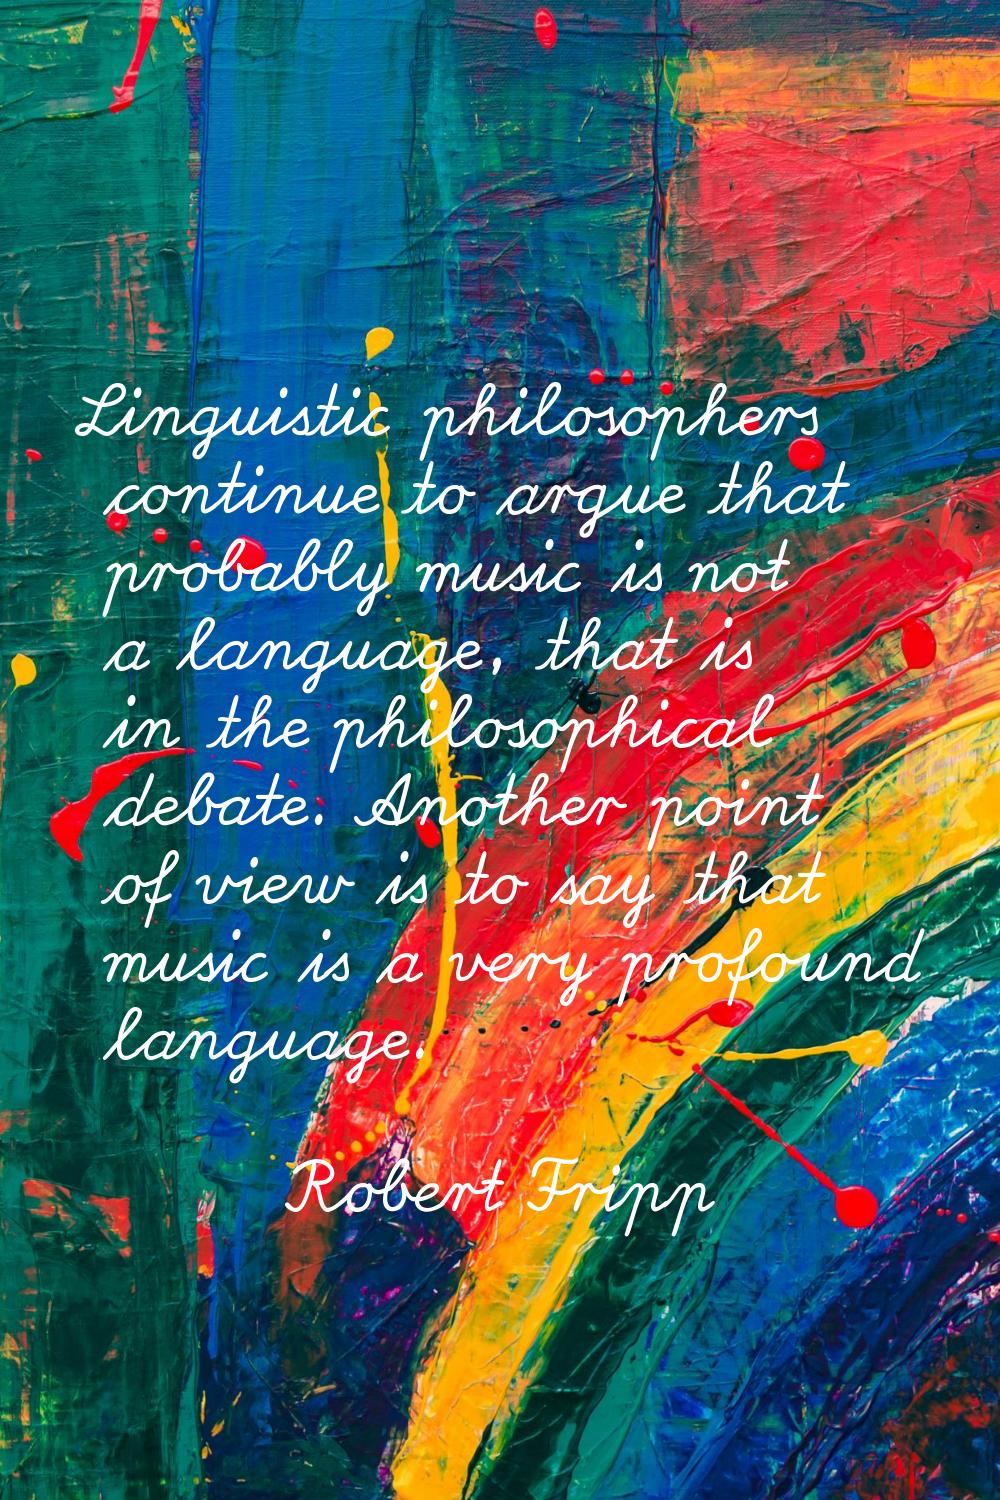 Linguistic philosophers continue to argue that probably music is not a language, that is in the phi